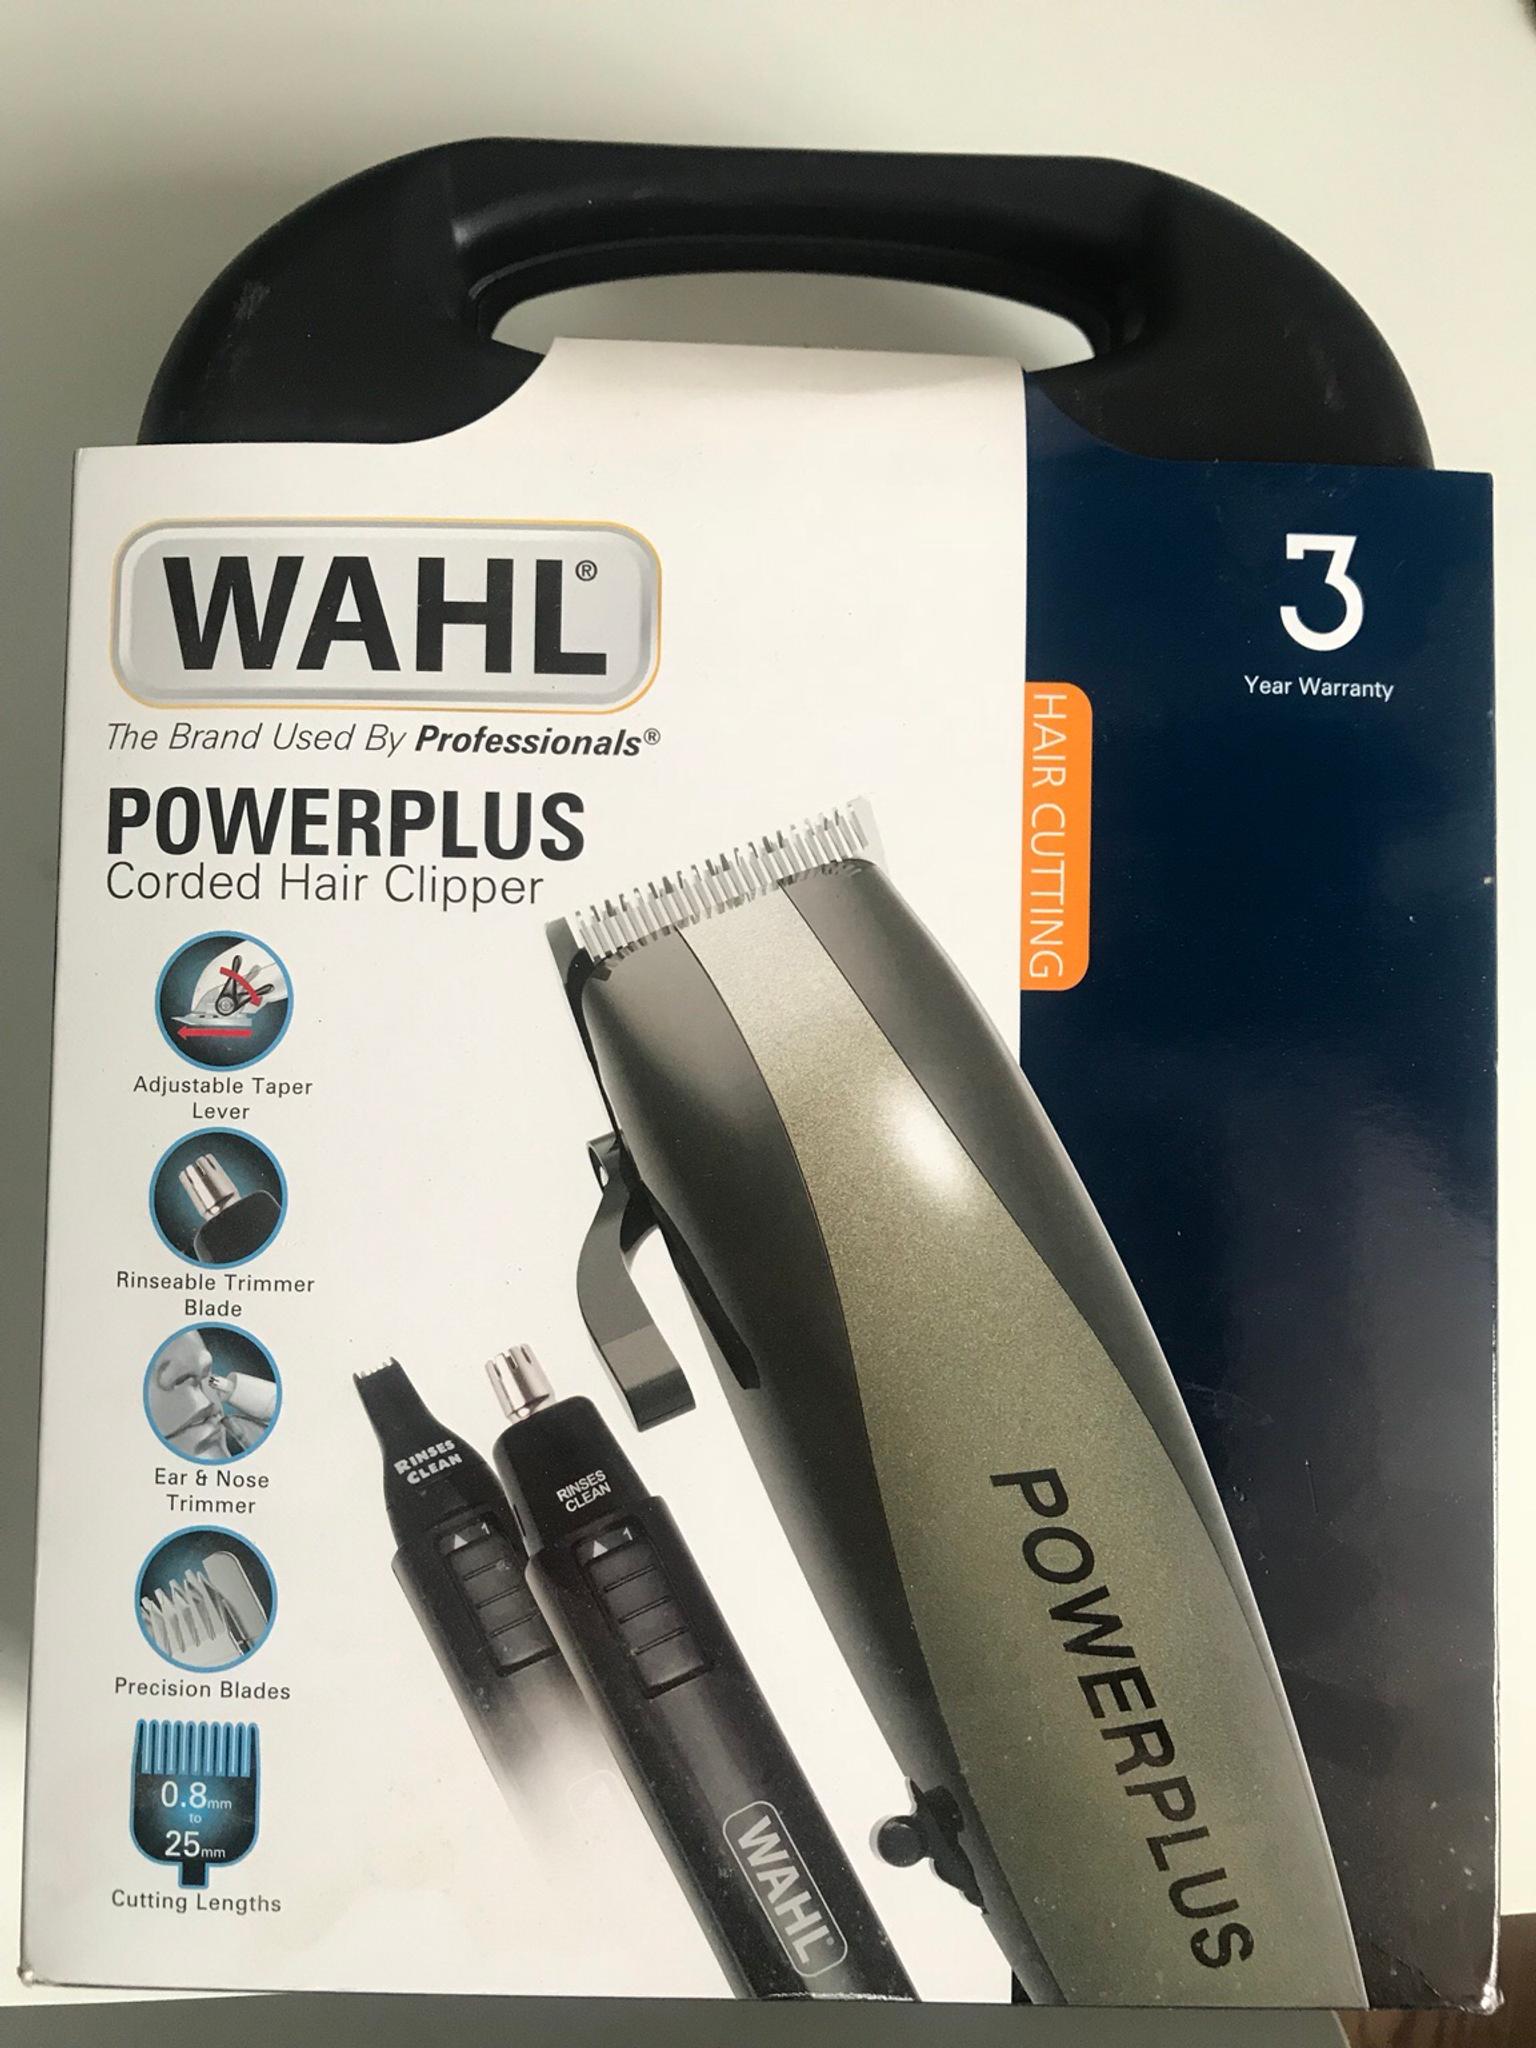 Wahl Power Plus Corded Hair Clipper